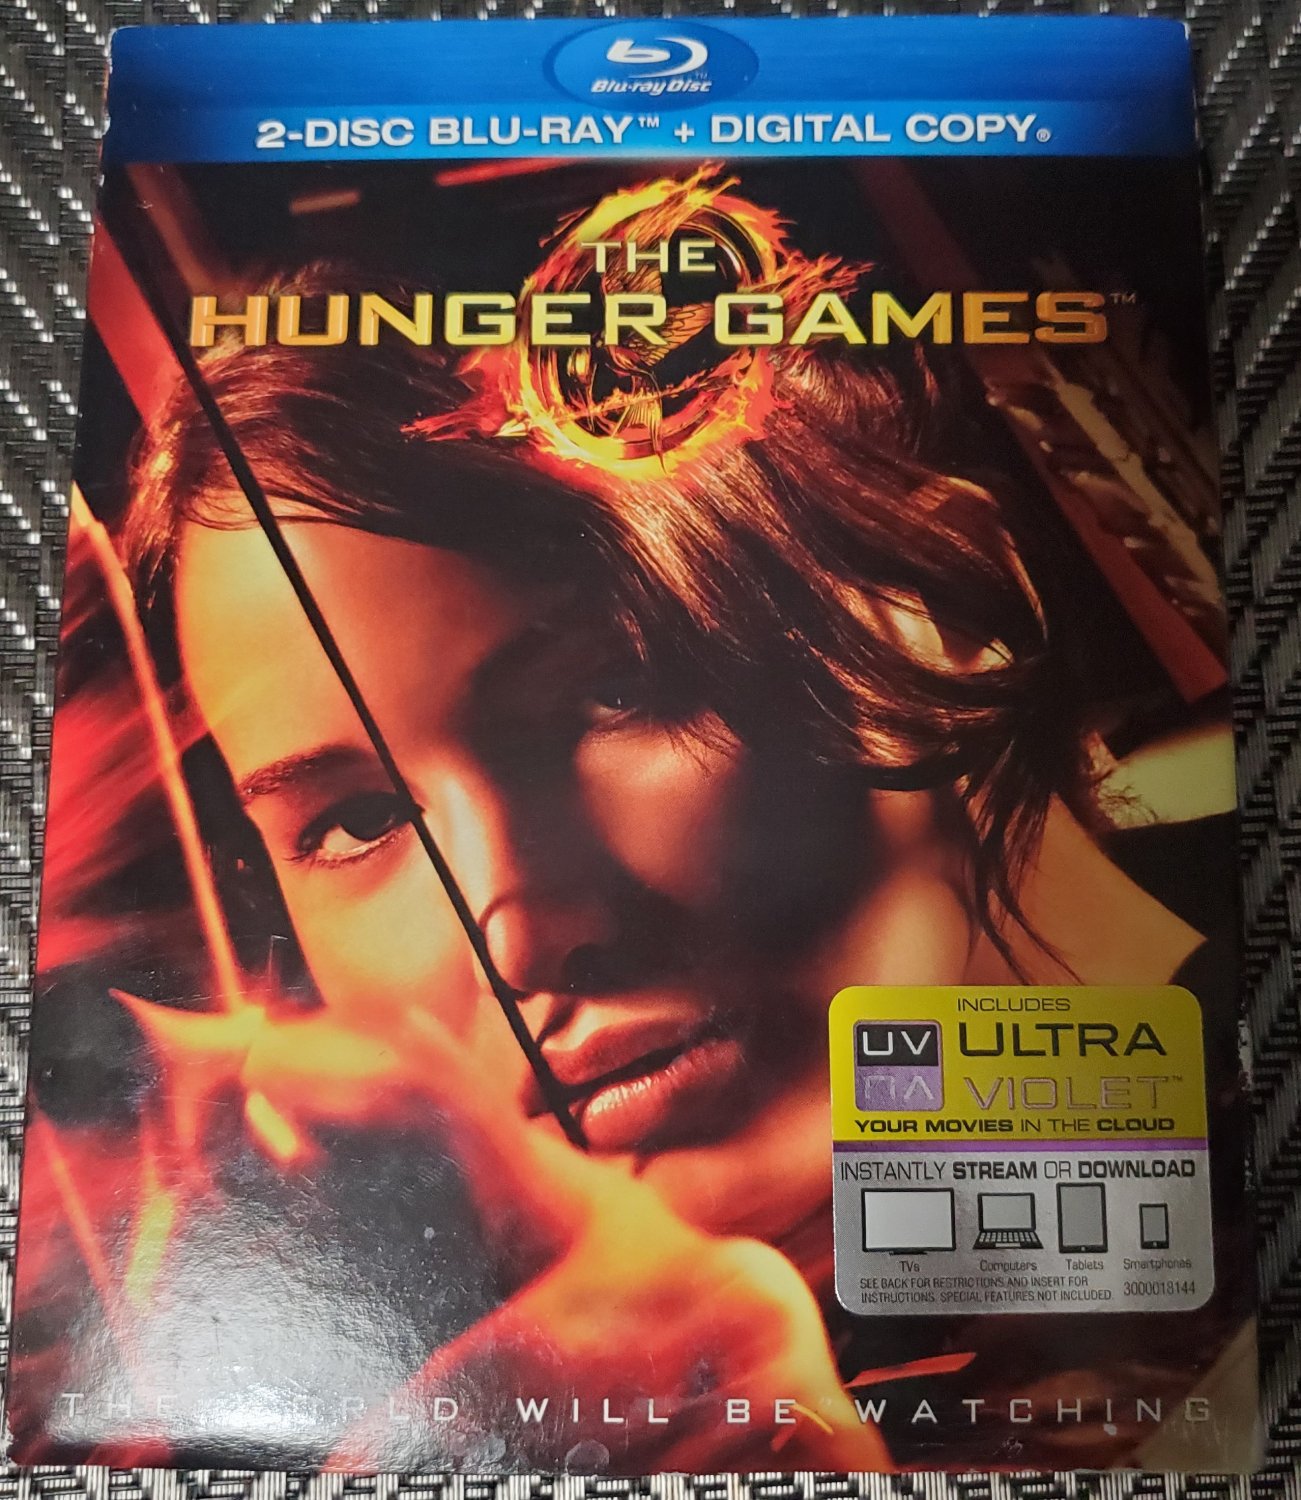 The Hunger Games 2 Disc Blu Ray